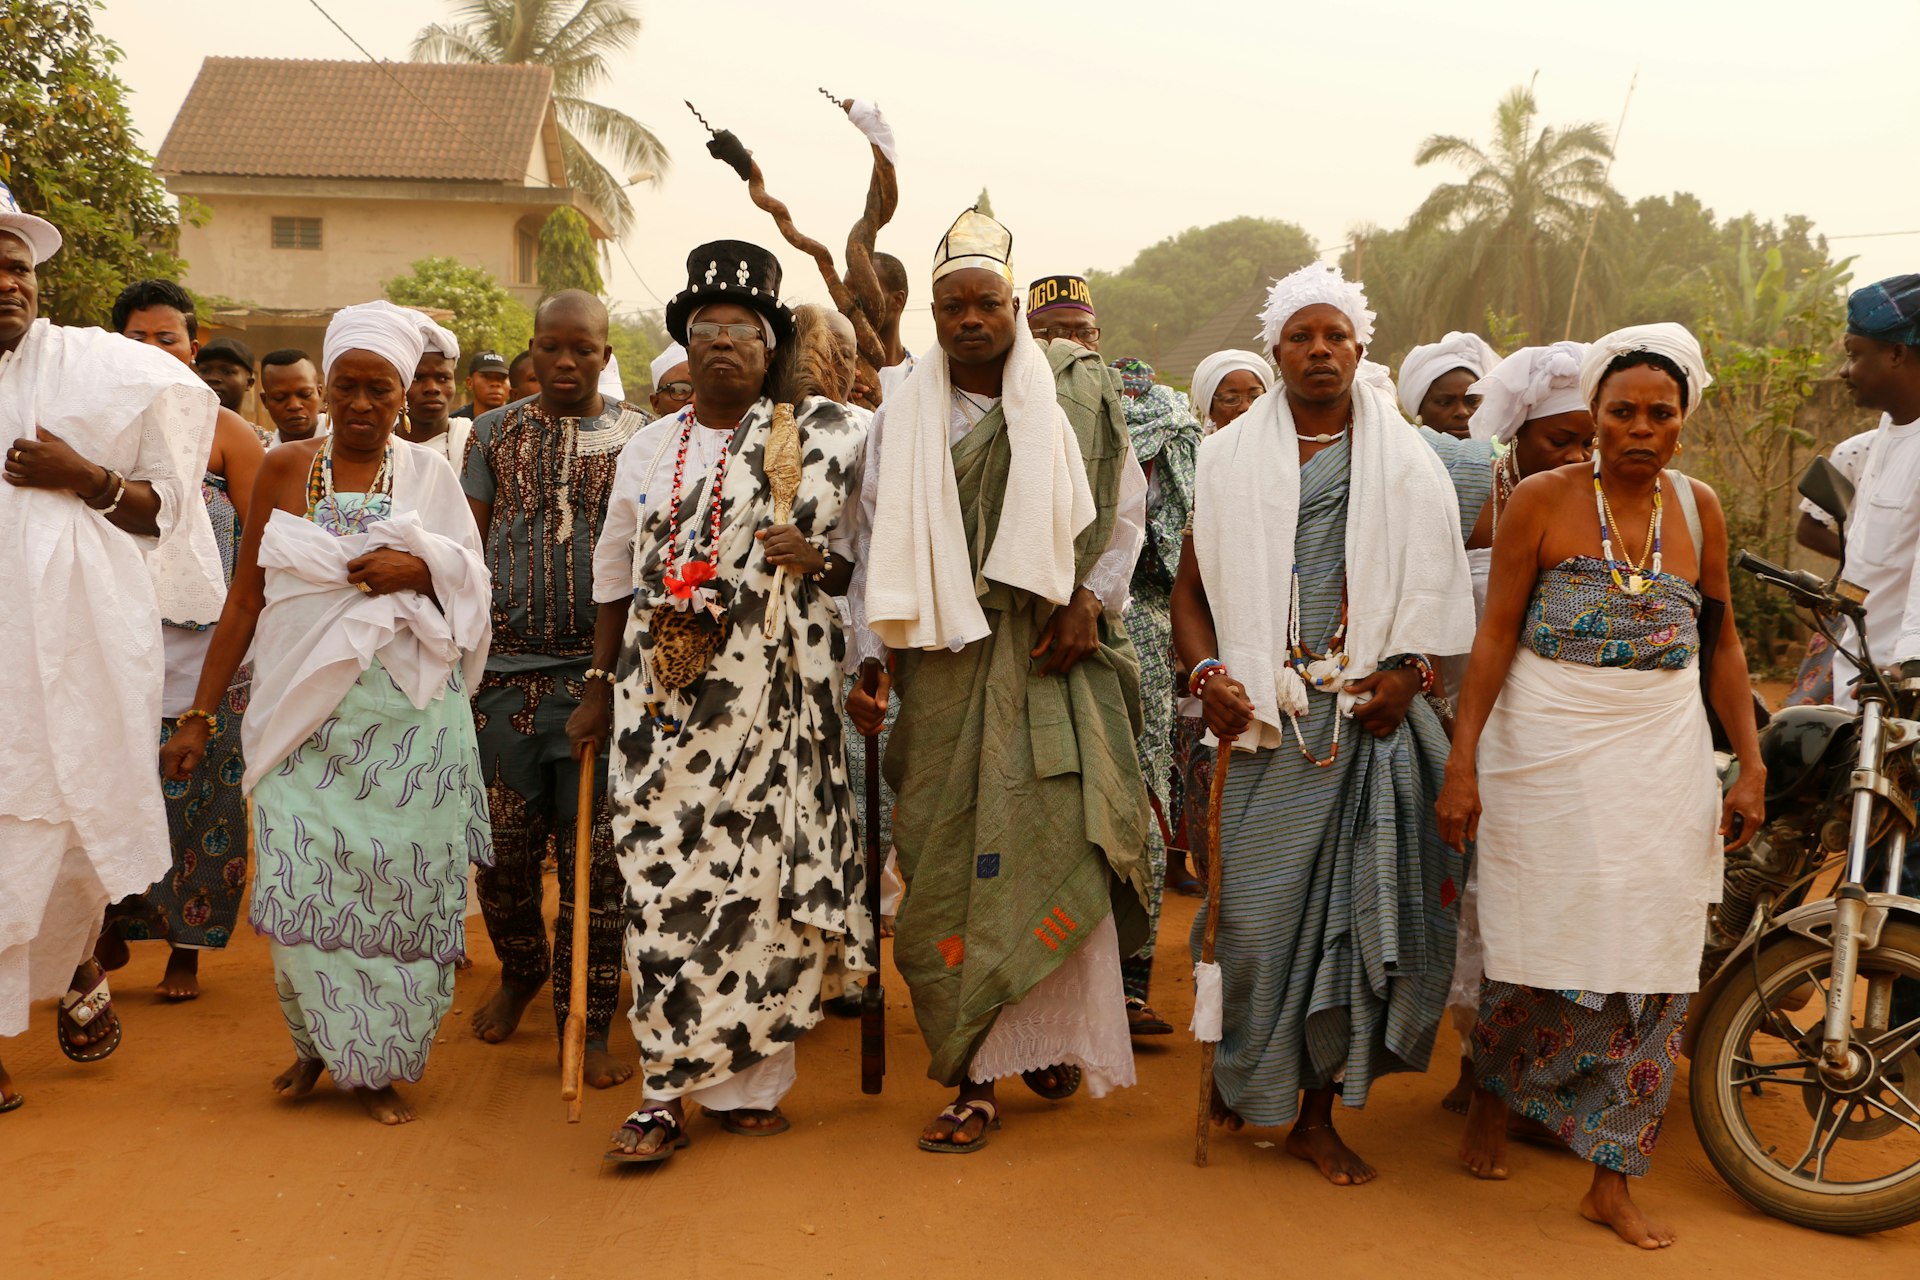 A group of people walking with priests at a Voodoo celebration in Ouidah, Benin